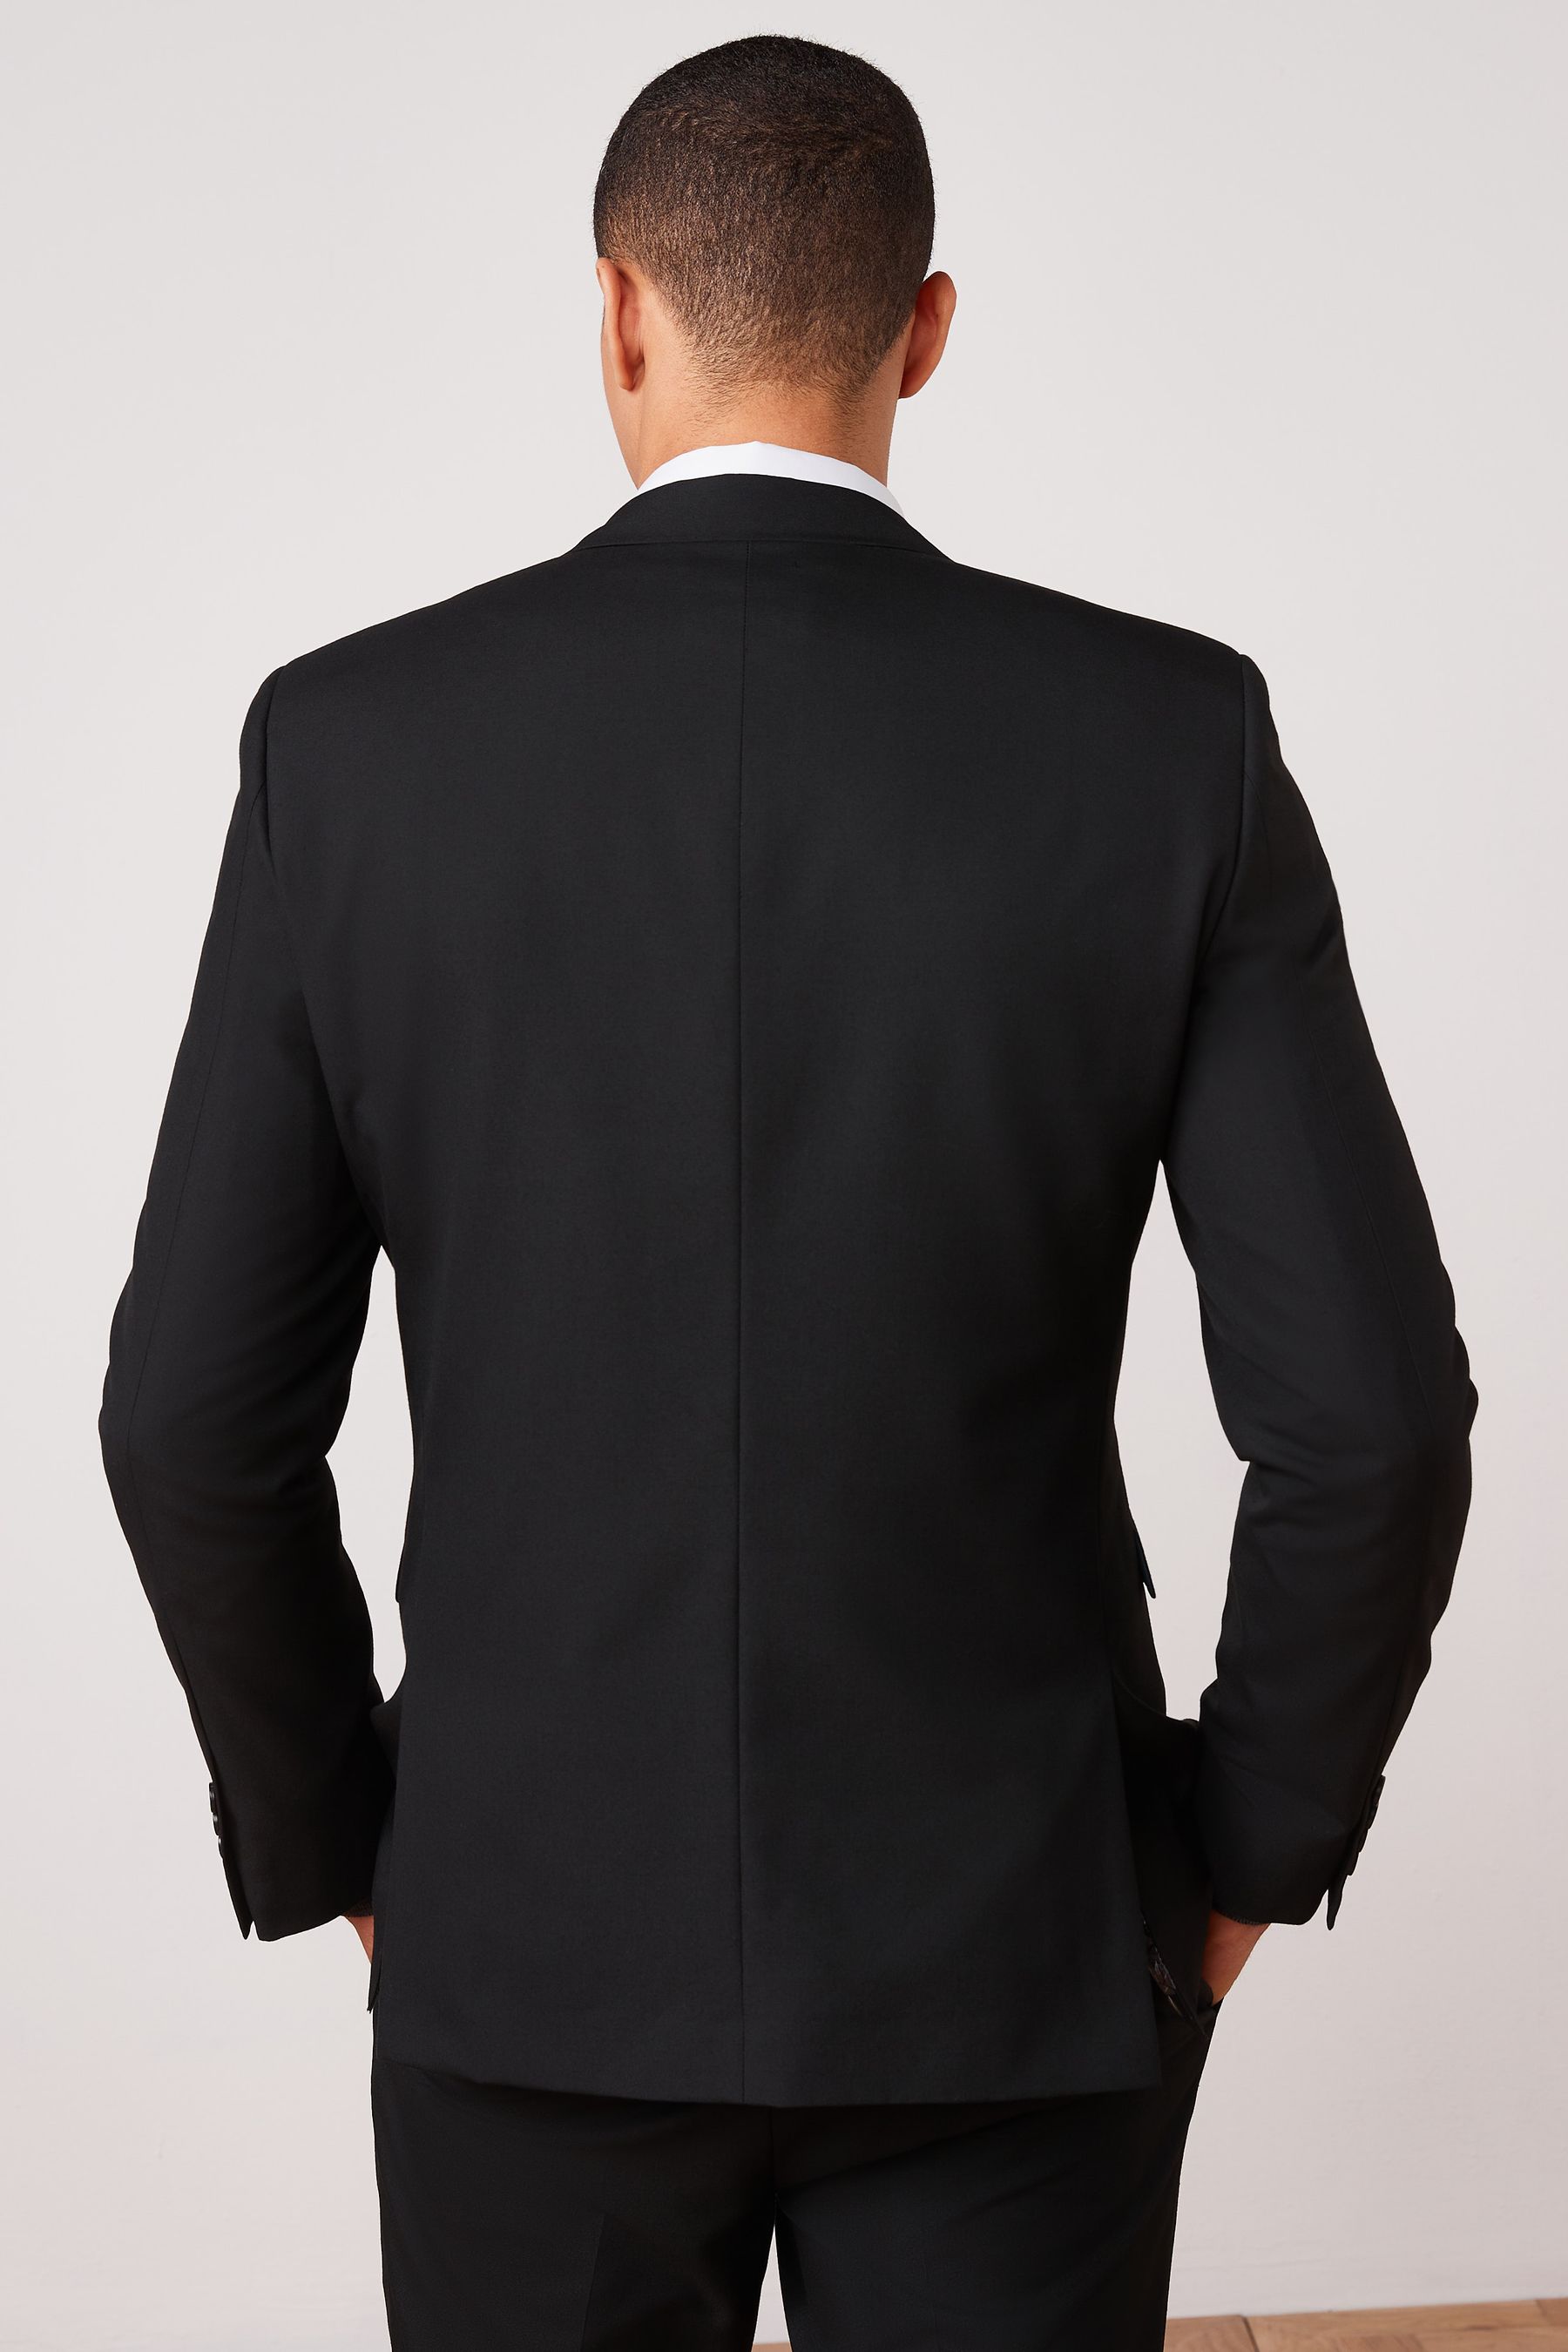 Buy Black Slim Fit Two Button Suit Jacket from the Next UK online shop